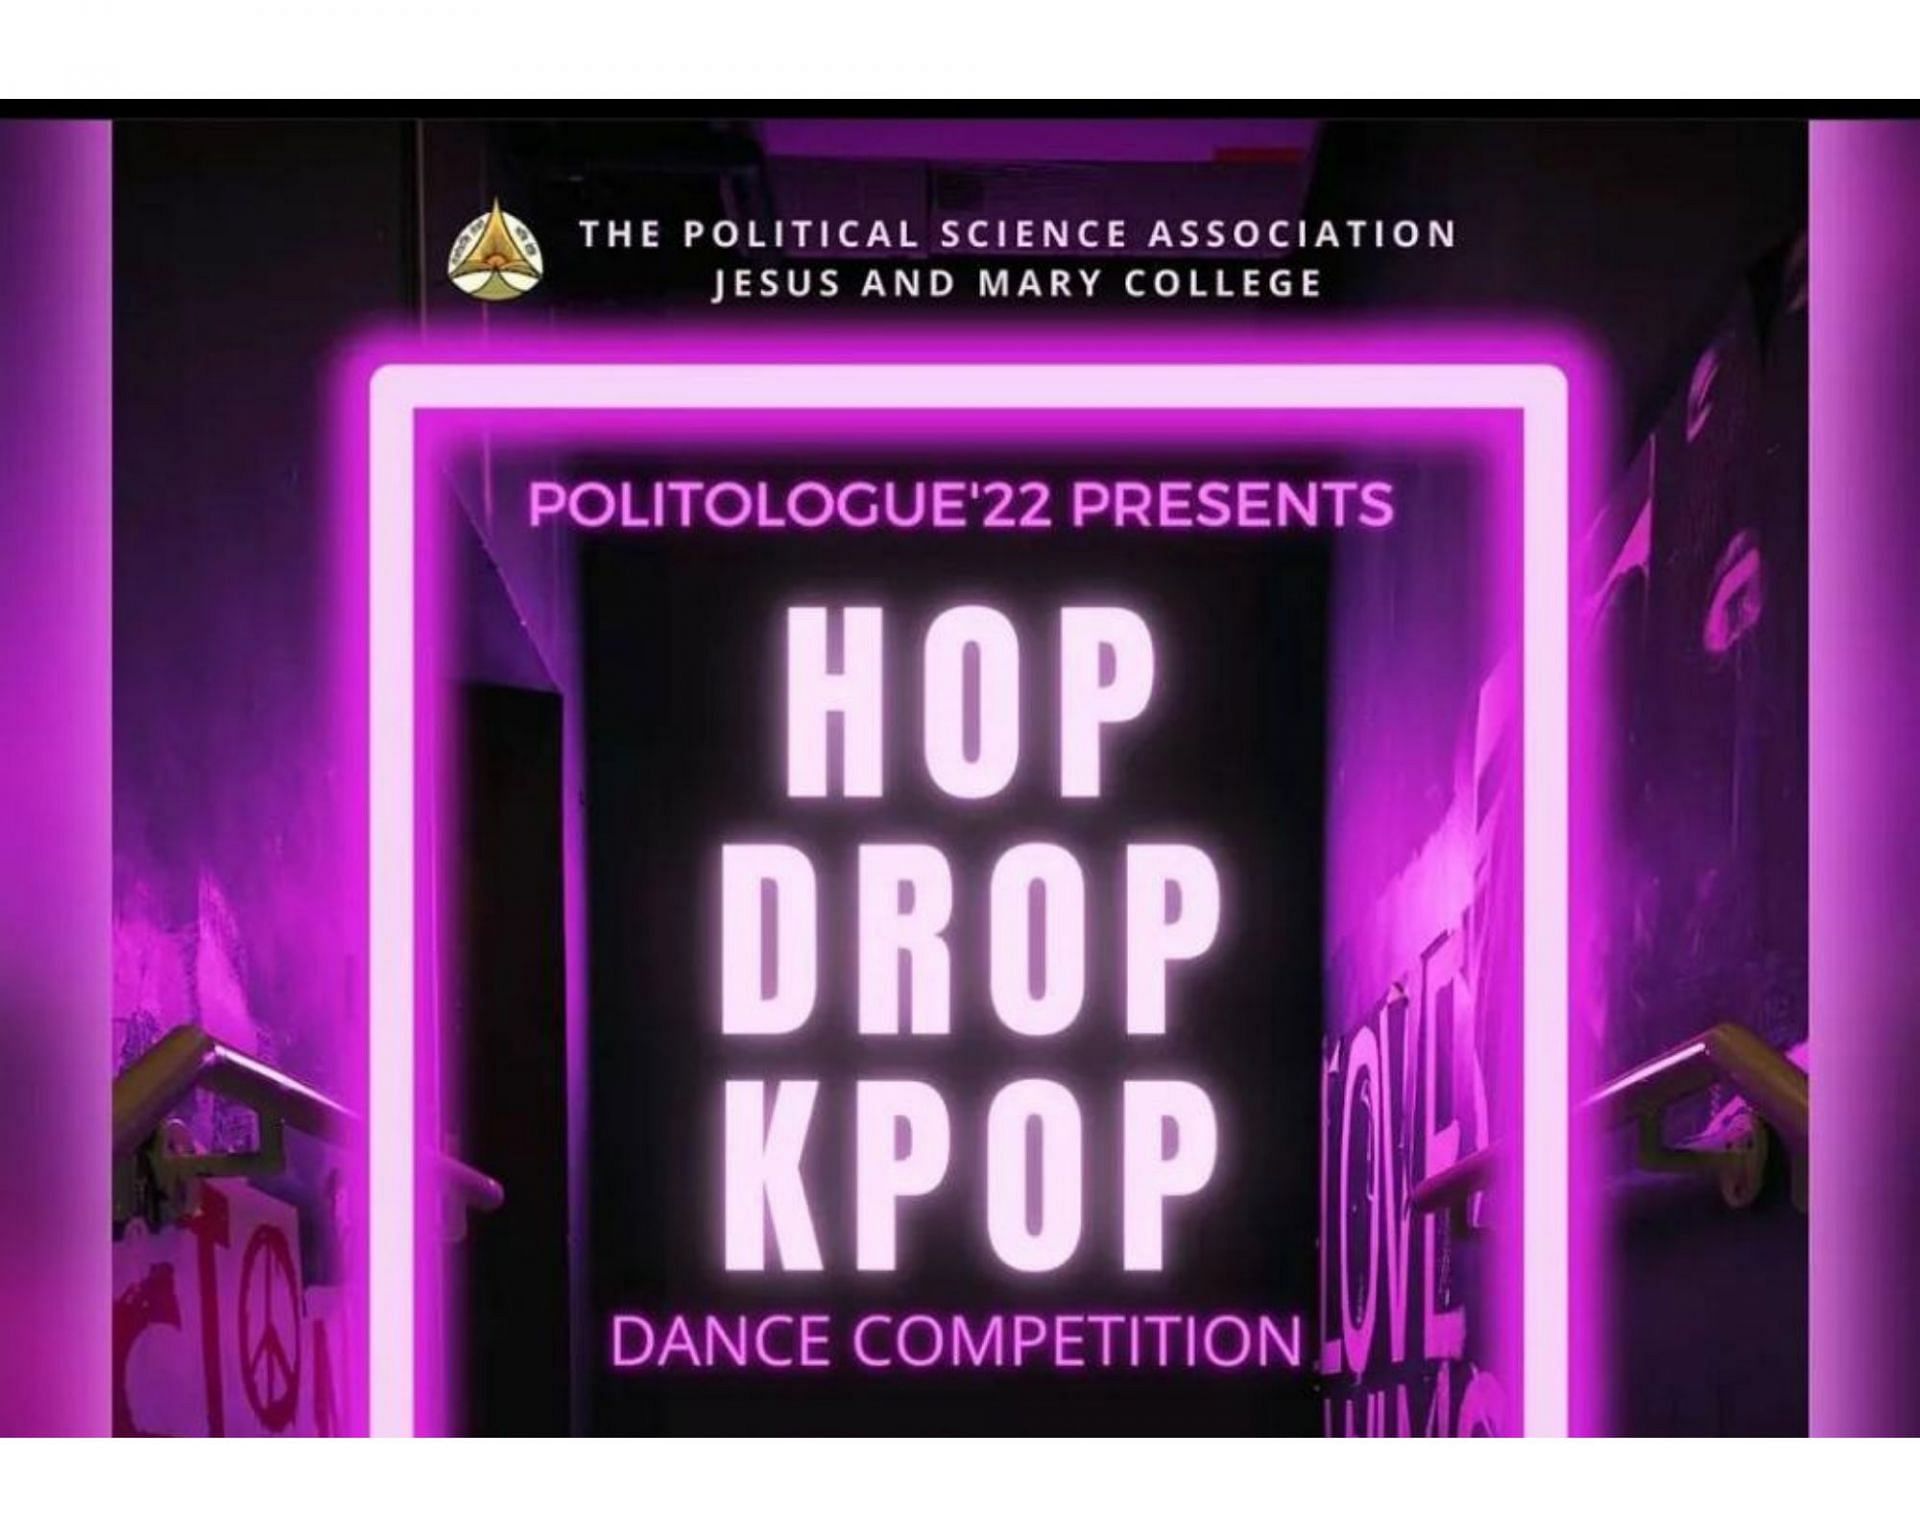 Inter College K-pop dance competition in India